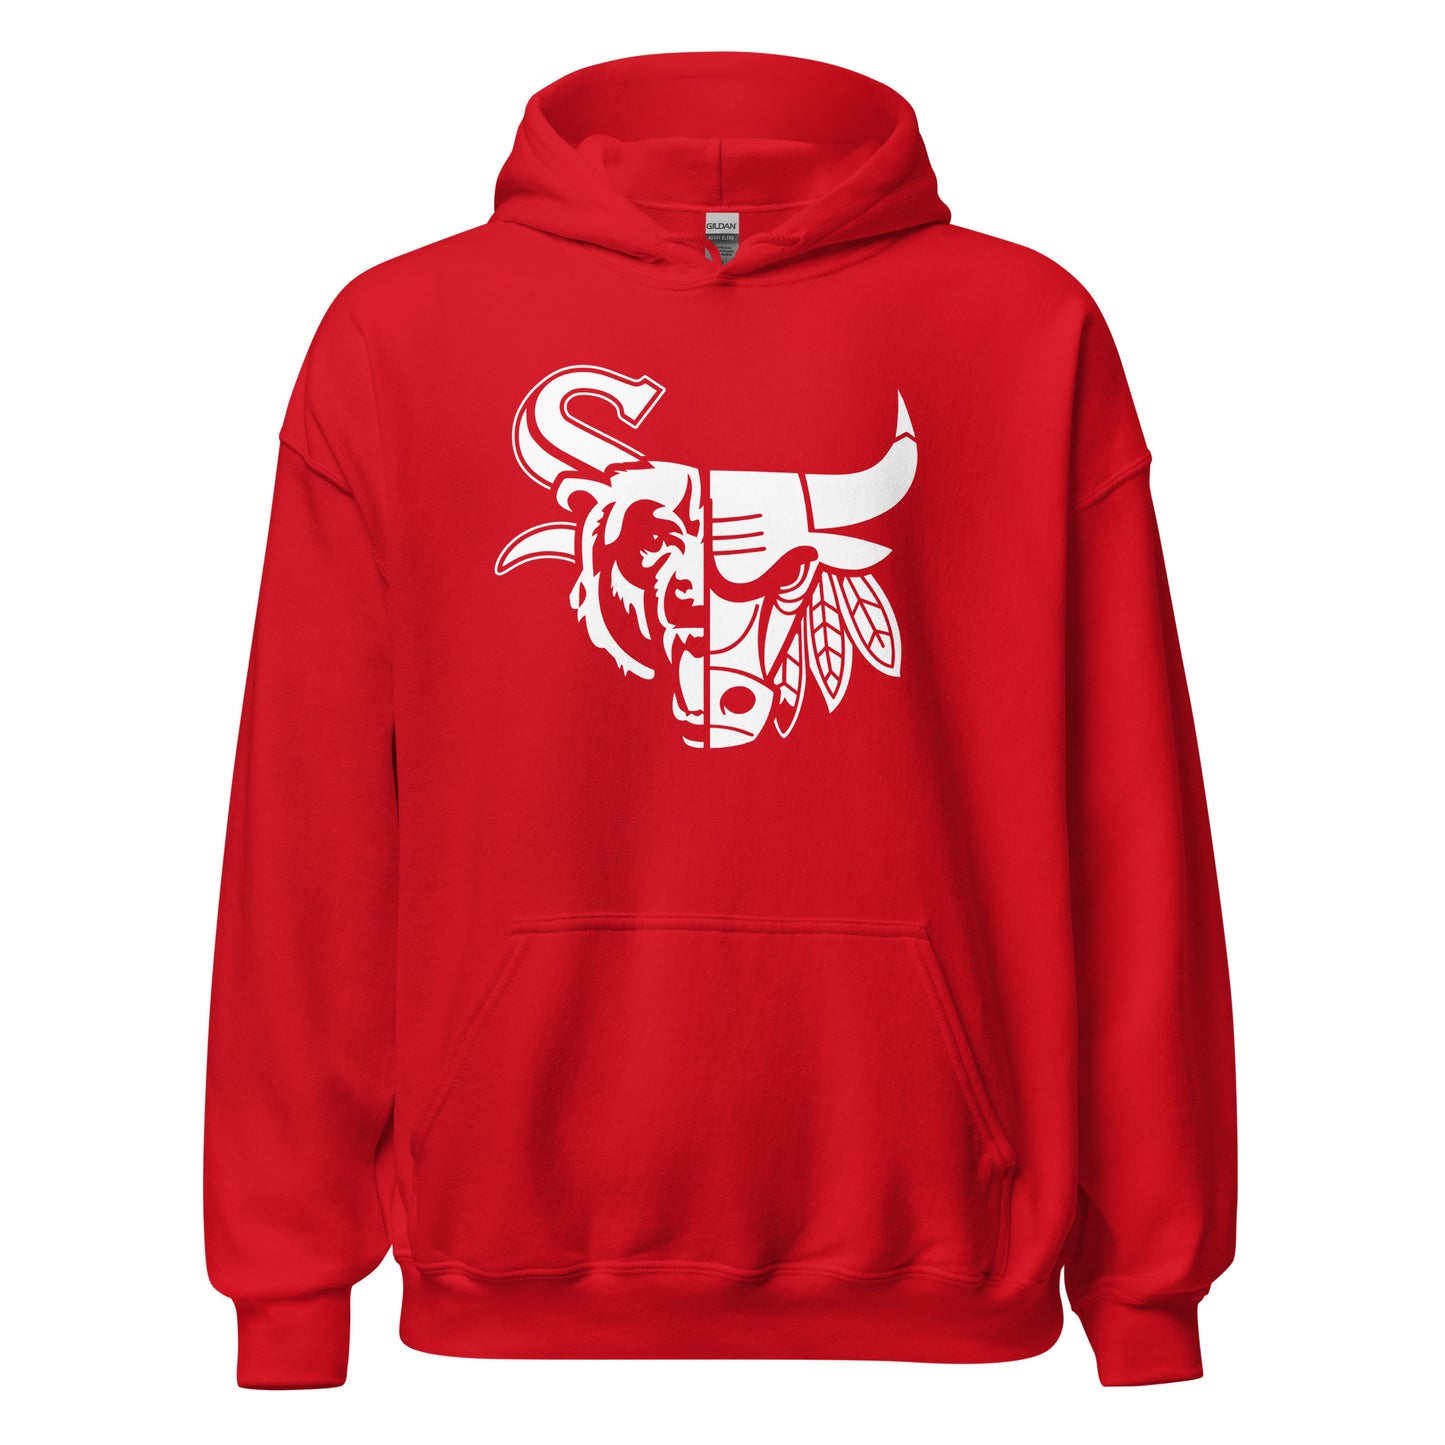 CHI (Sox) Hoodie - 1 Color